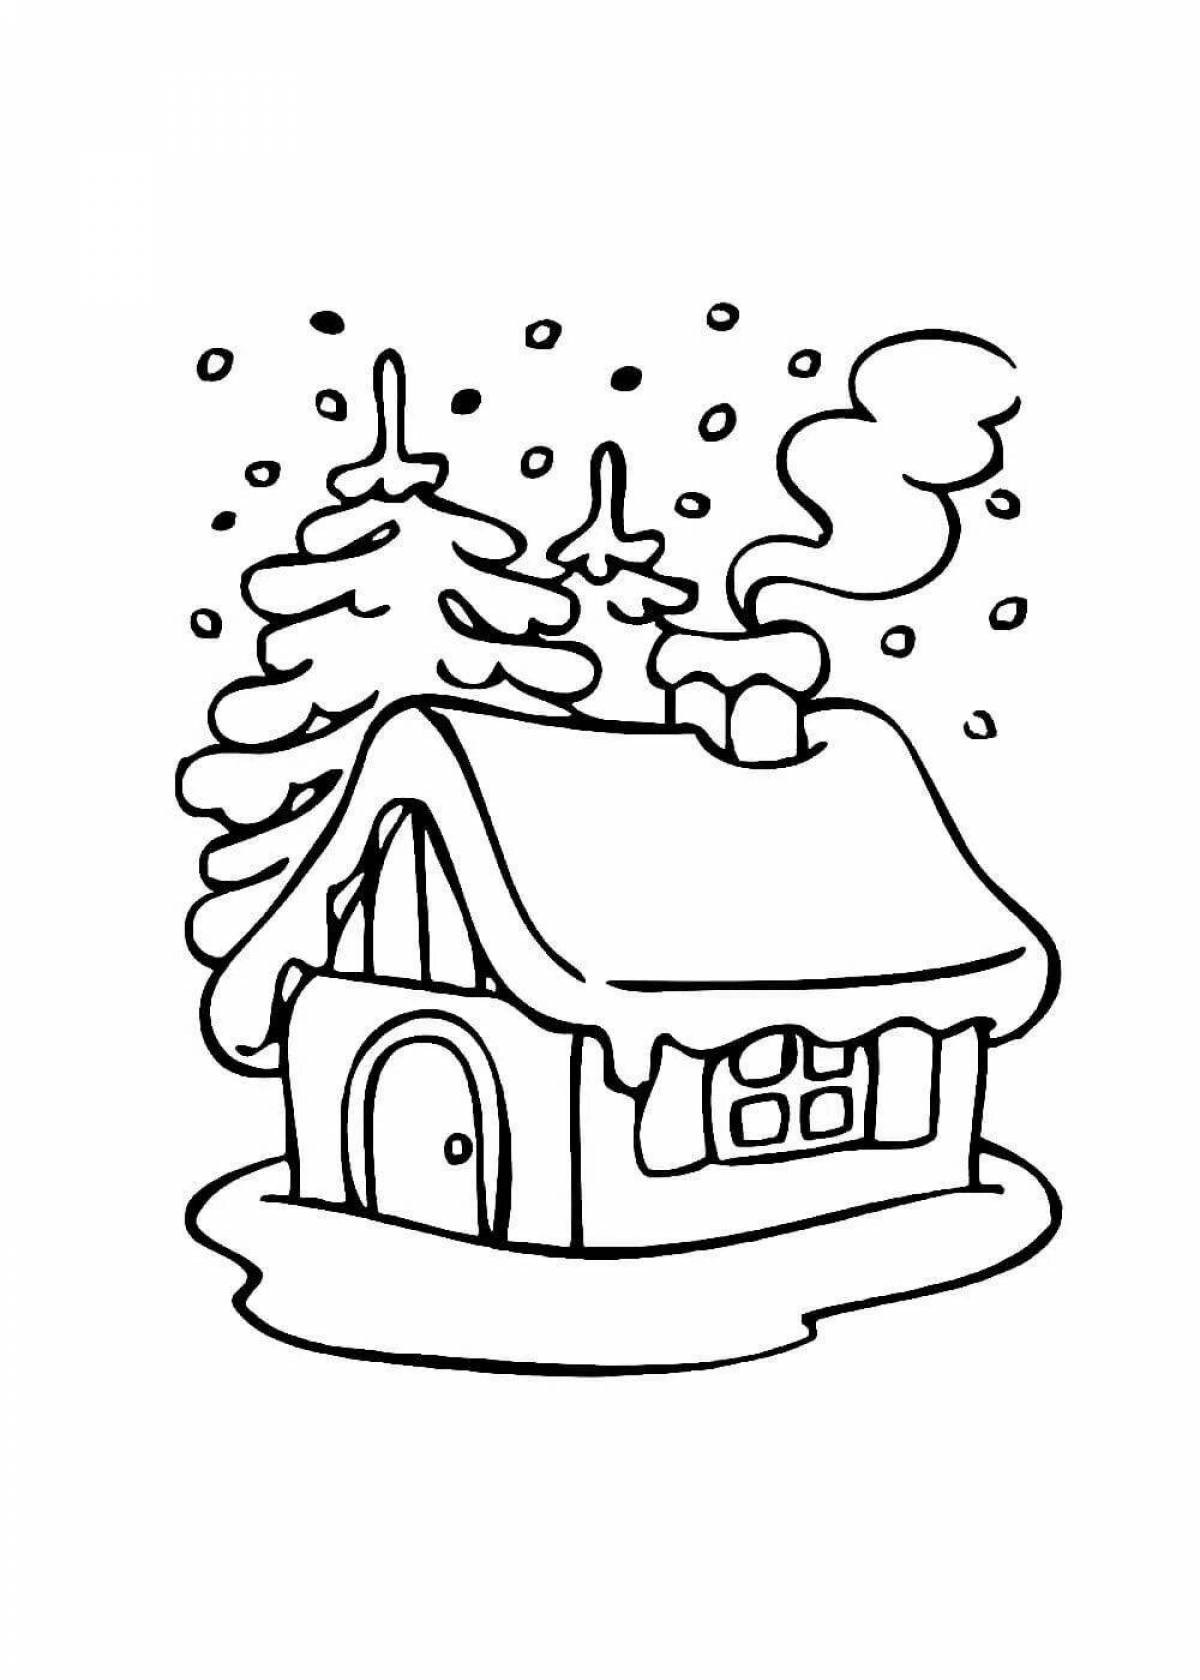 Gorgeous snowfall coloring for kids